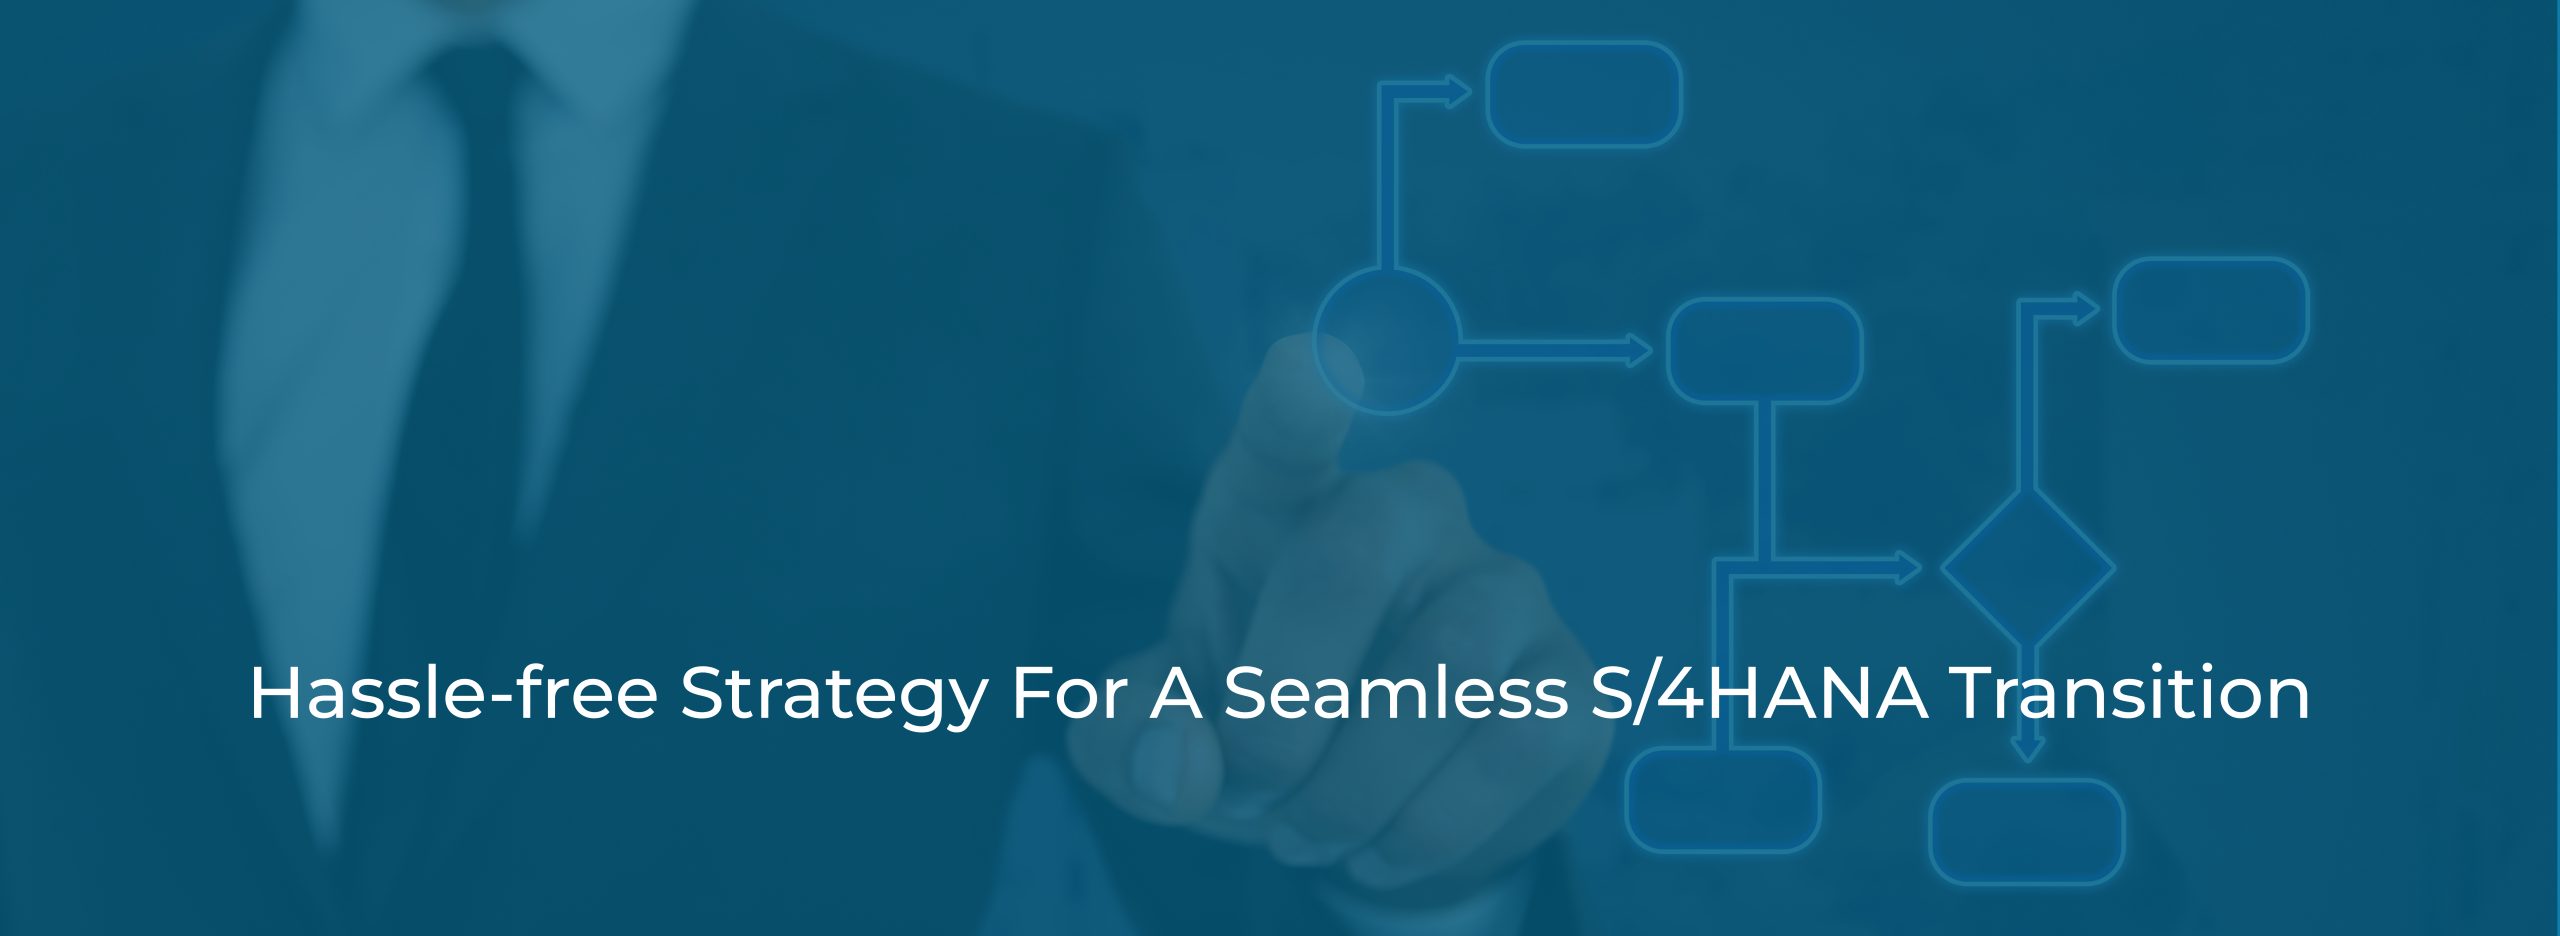 Hassle-free Strategy For A Seamless S_4HANA Transition